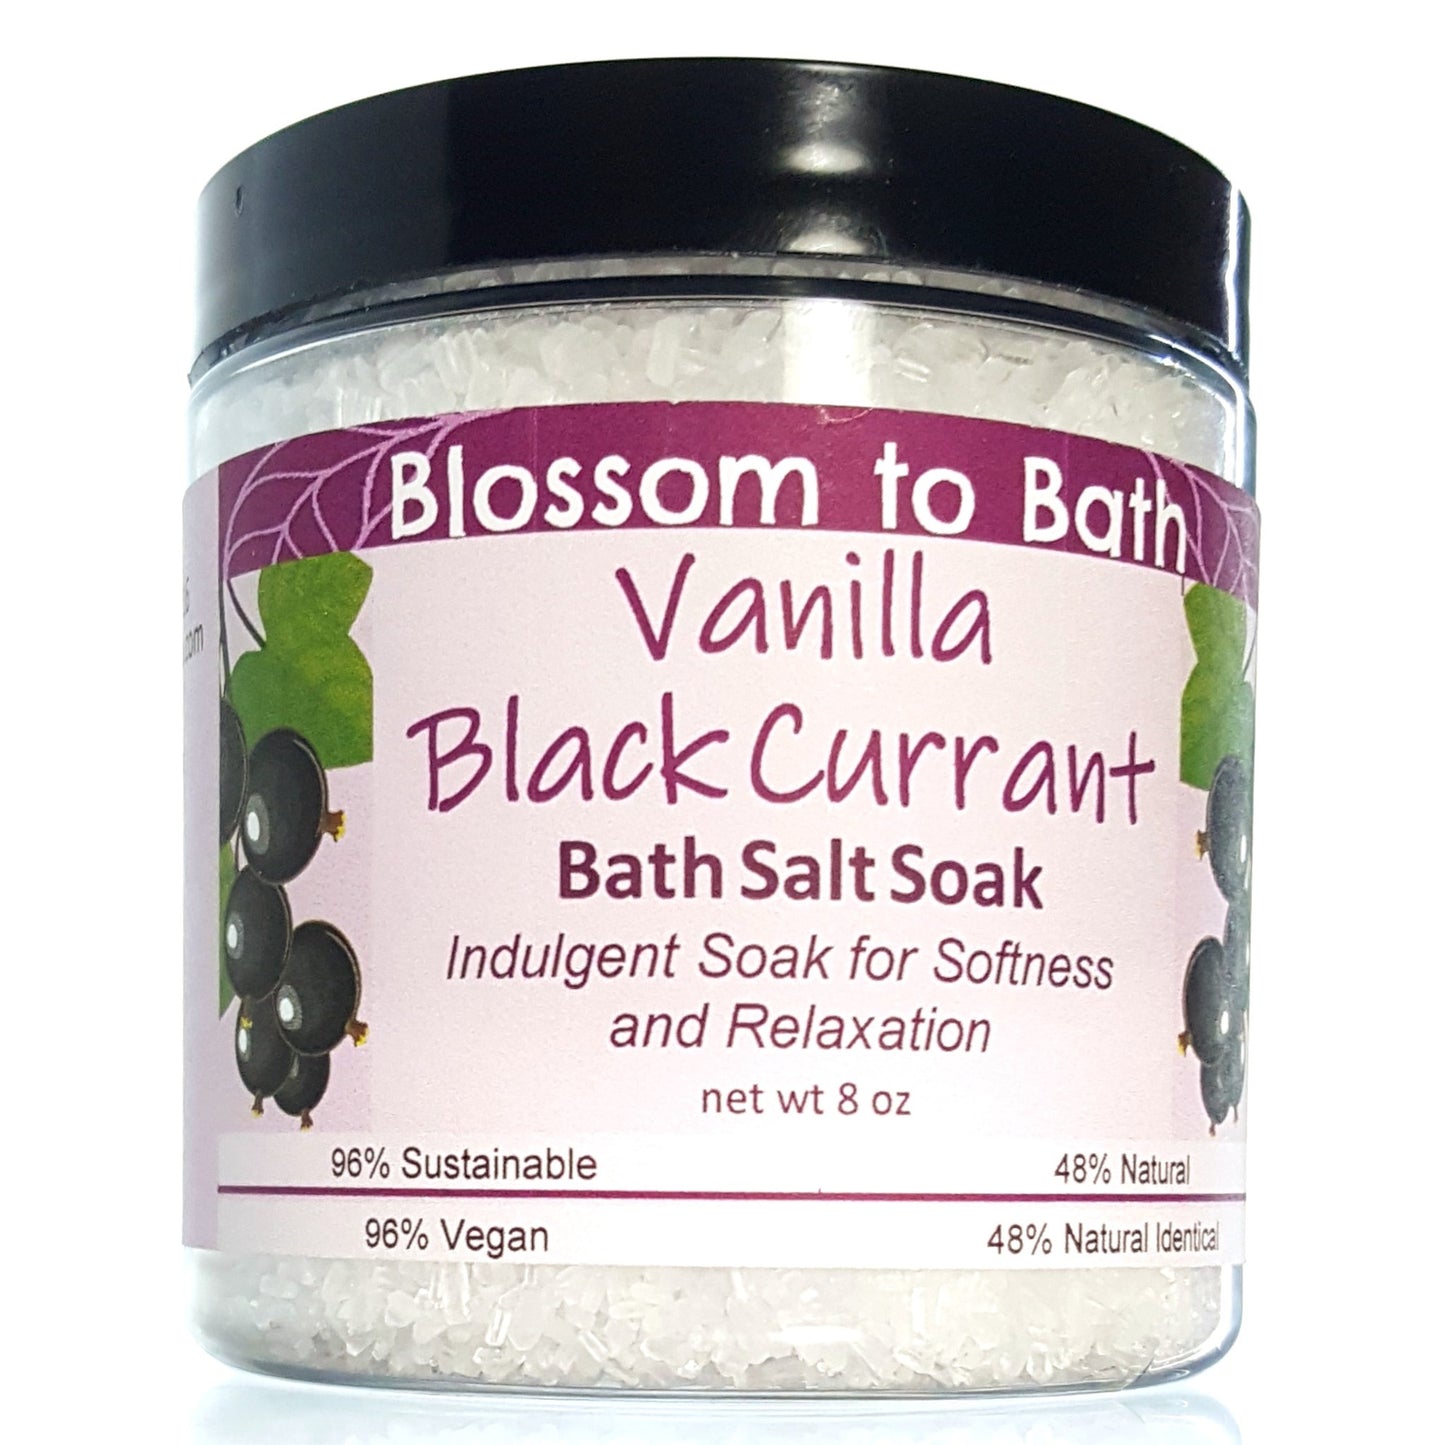 Buy Blossom to Bath Vanilla Black Currant Bath Salt Soak from Flowersong Soap Studio.  Scented epsom salts for a luxurious soaking experience  A sensuous rich berry scent with a hint of vanilla and a twist of freshness.